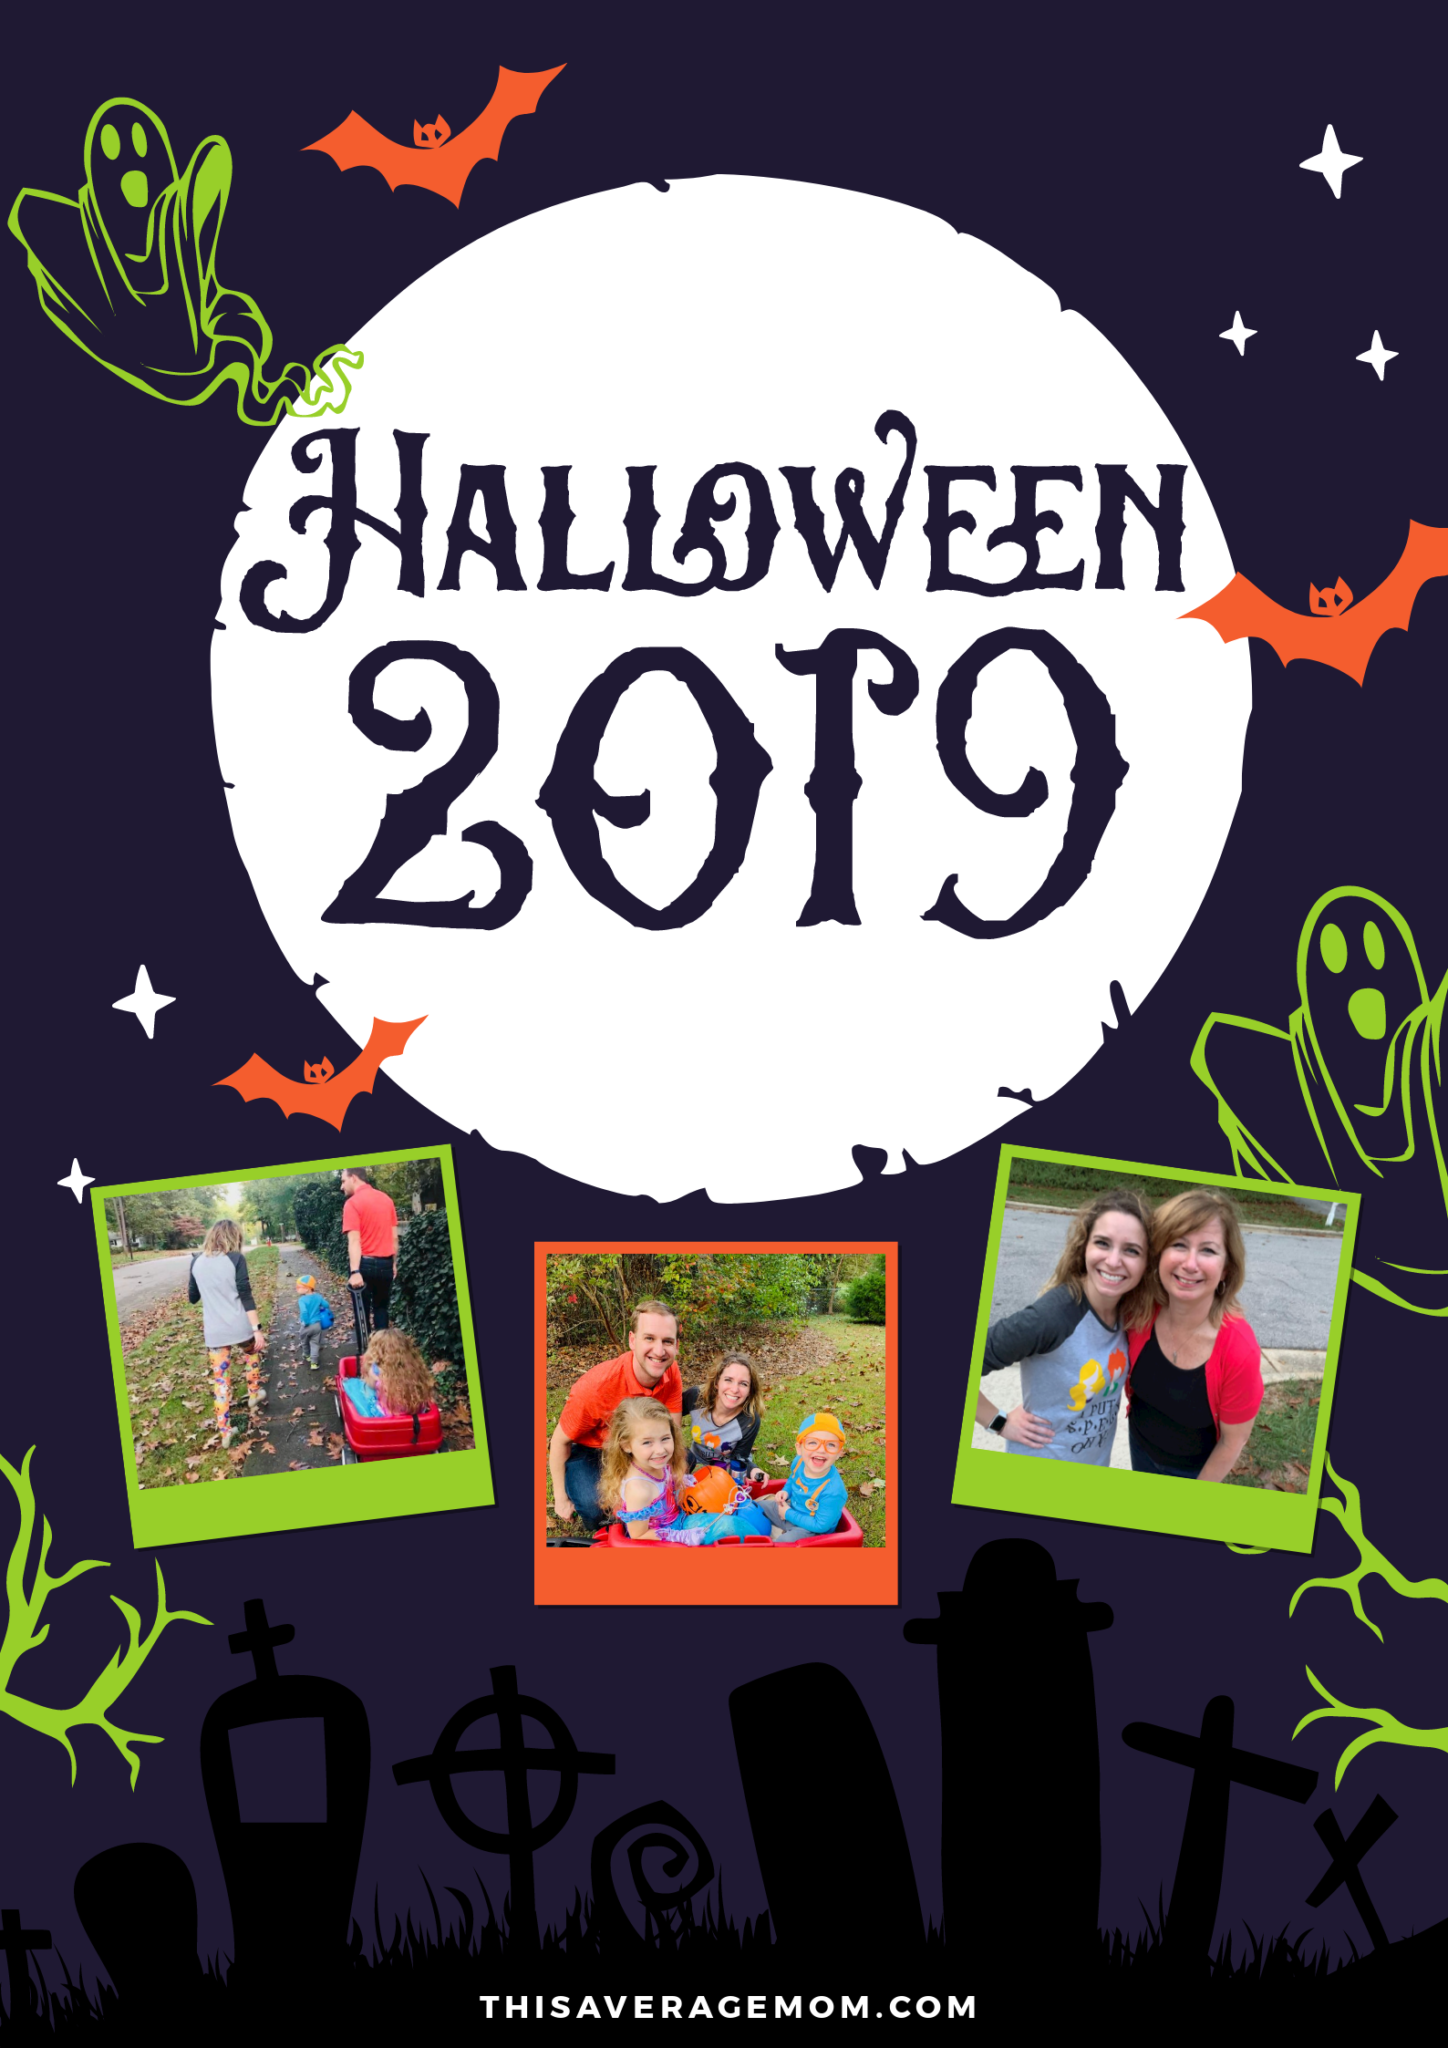 Halloween fun is on the blog! We had a mermaid princess and Blippi this year, and our kids LOVED every second of the night. #halloween #trickortreat #family